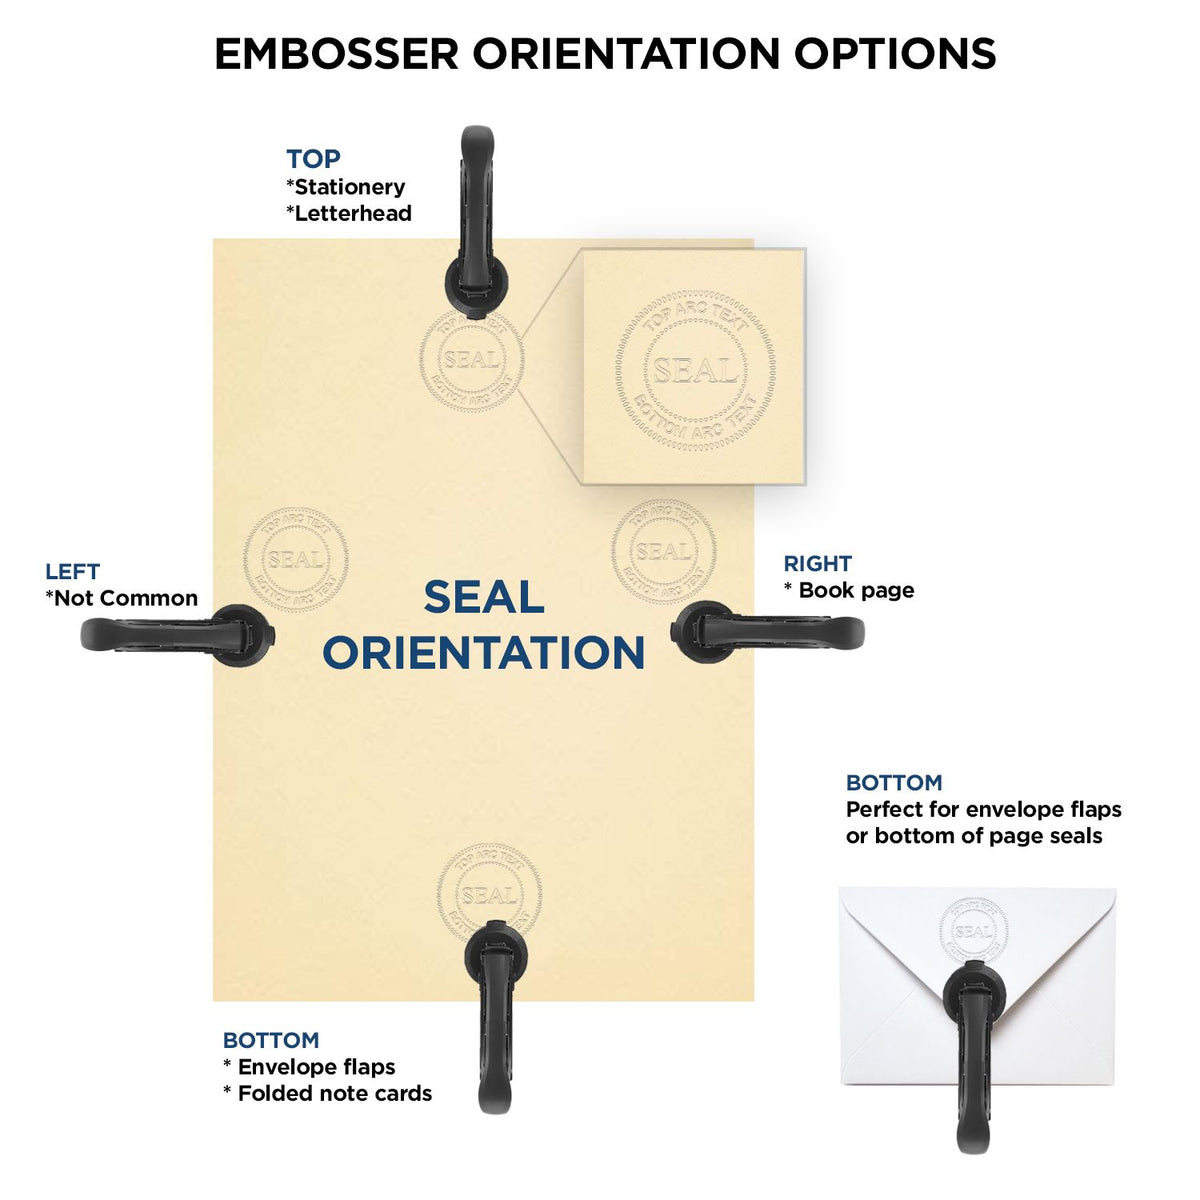 An infographic for the Handheld Louisiana Professional Geologist Embosser showing embosser orientation, this is showing examples of a top, bottom, right and left insert.